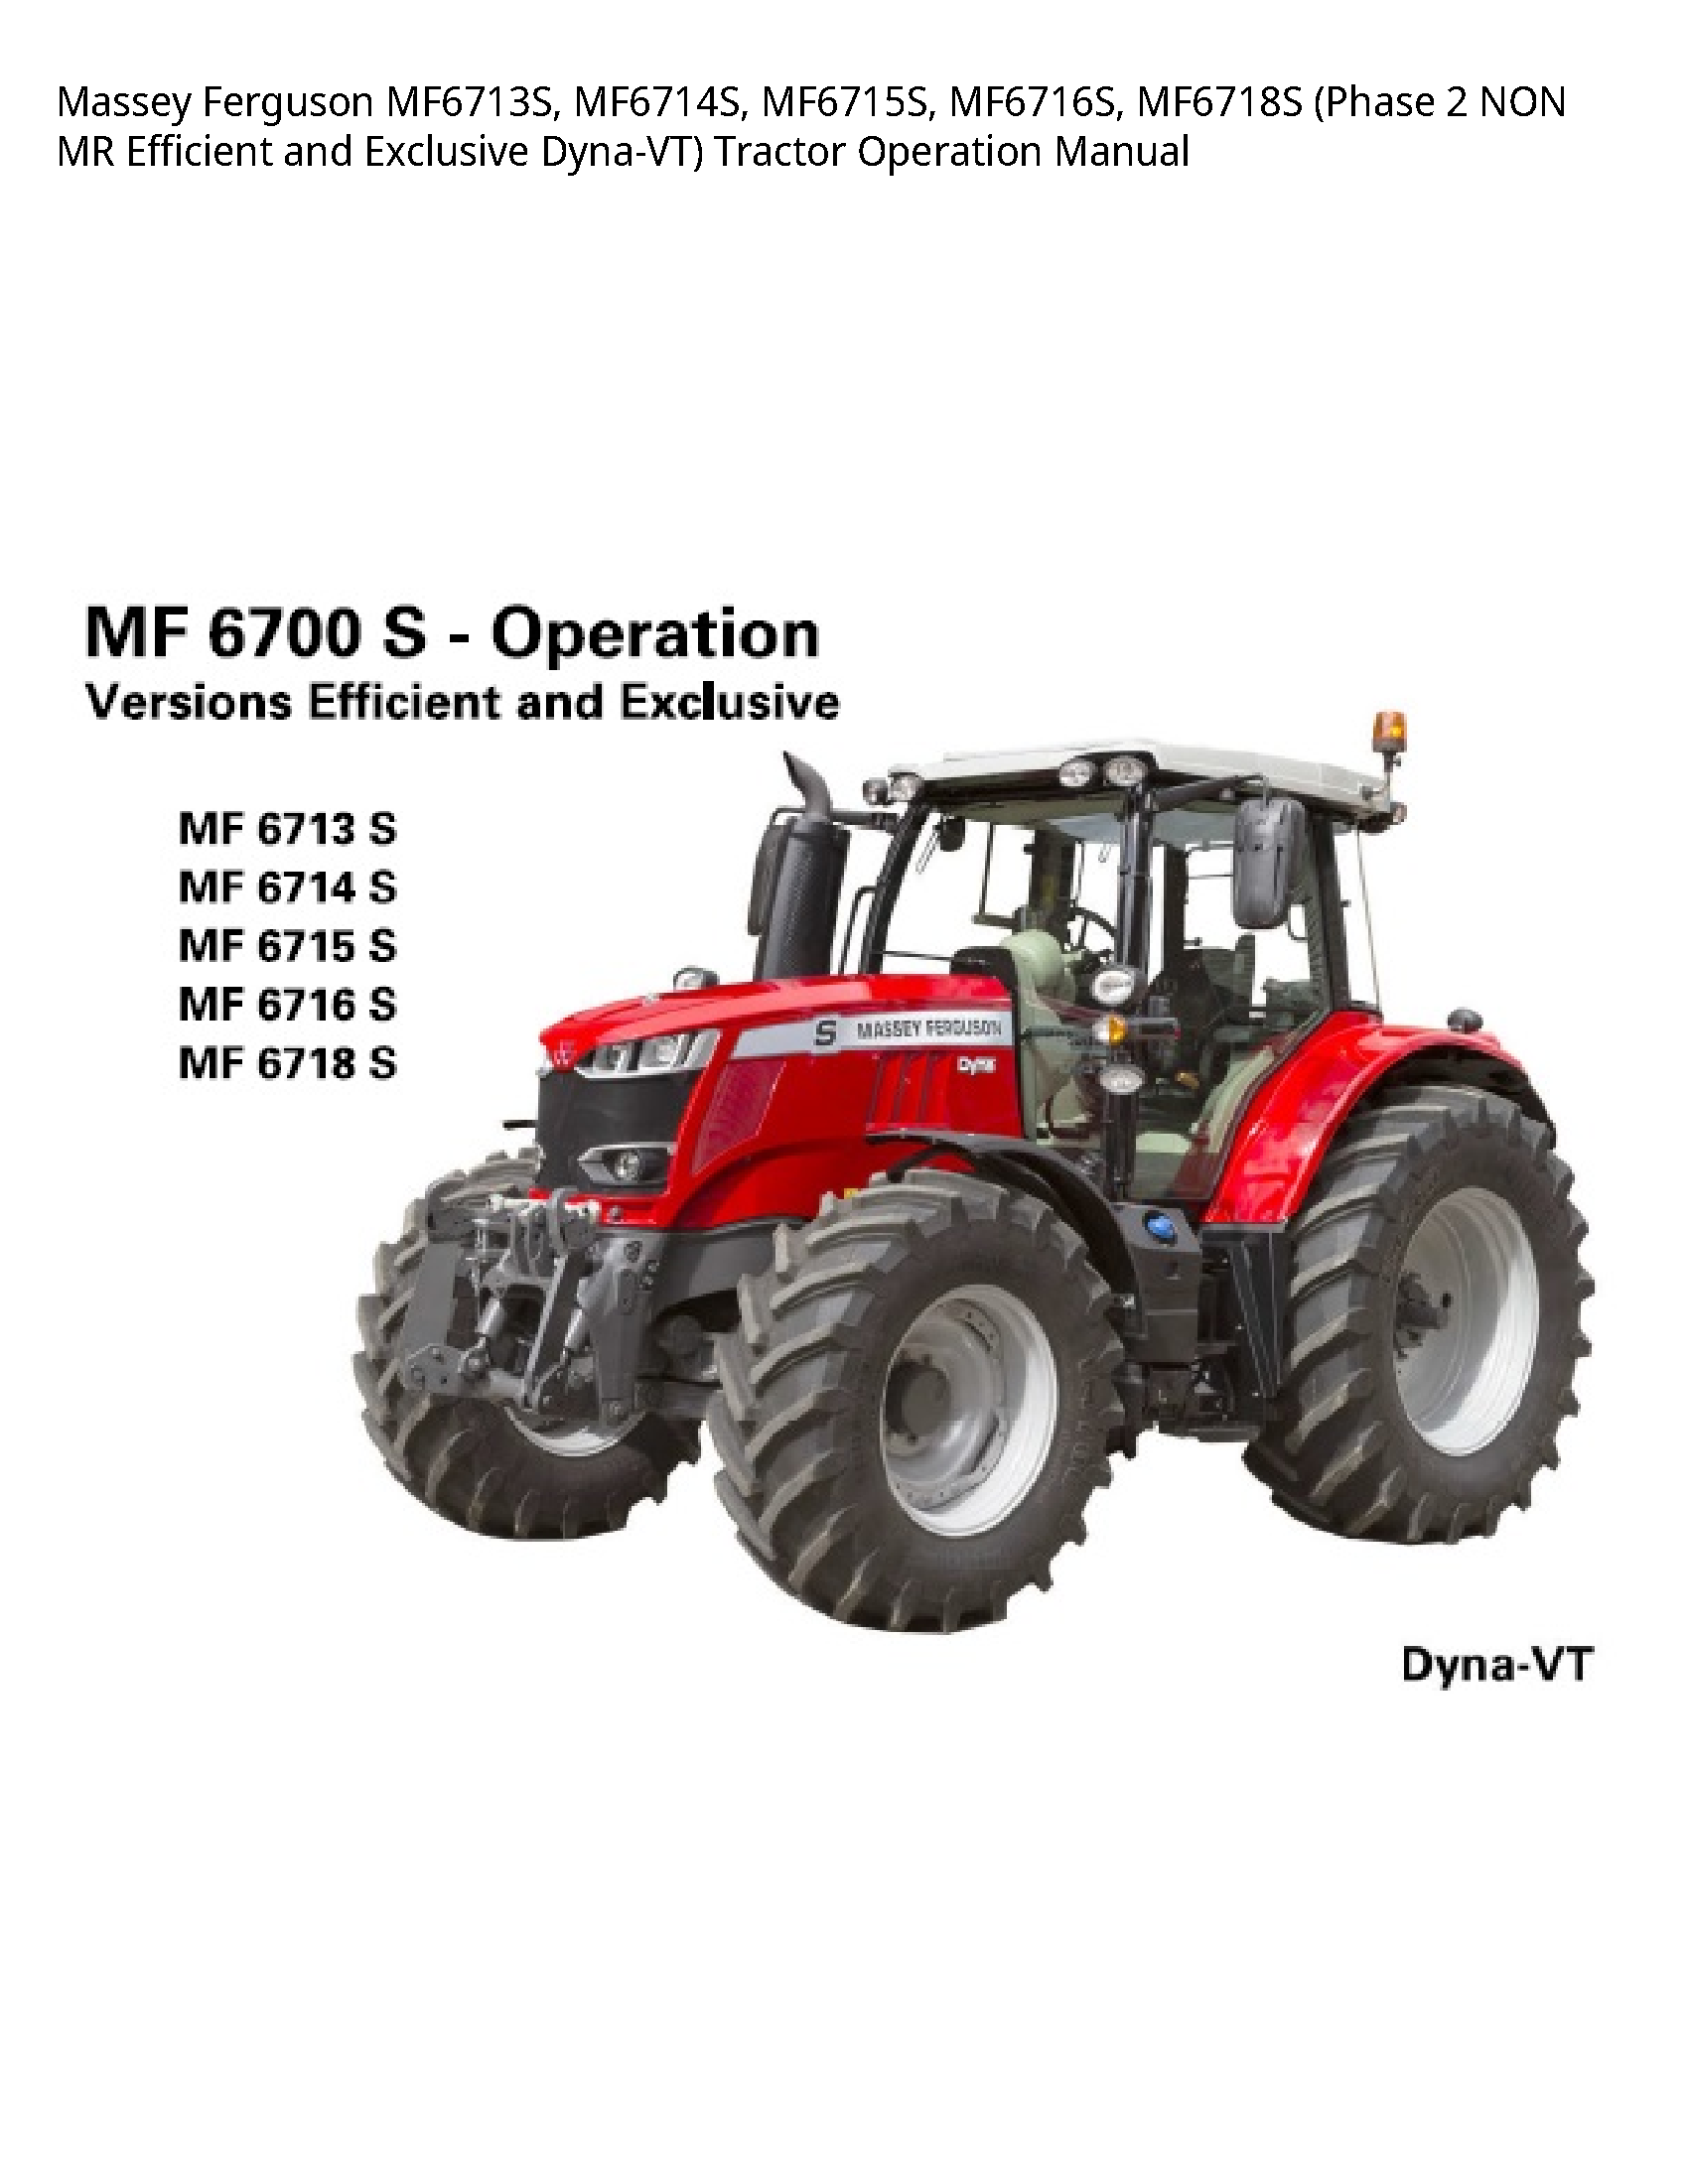 Massey Ferguson MF6713S (Phase NON MR Efficient  Exclusive Dyna-VT) Tractor Operation manual